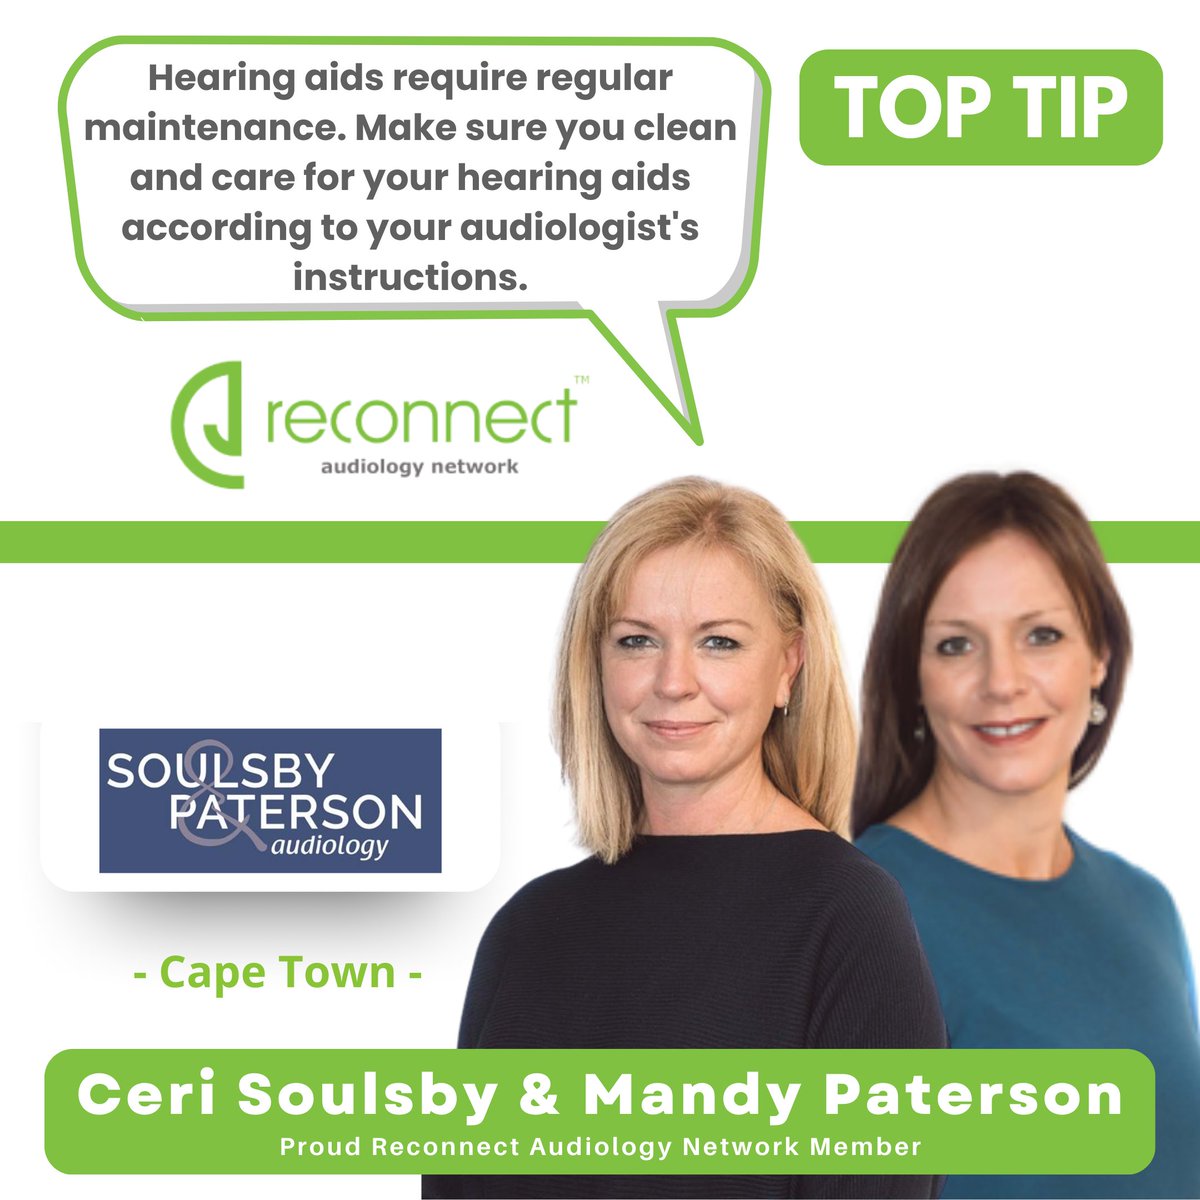 Today #Audiologists in #IndependentPractice Ceri Soulsby and Mandy Paterson from Soulsby Paterson Audiology share a tip about your hearing health.

Hearing aids require regular maintenance. 

You can contact Ceri and Mandy here 📲 021 797 3213